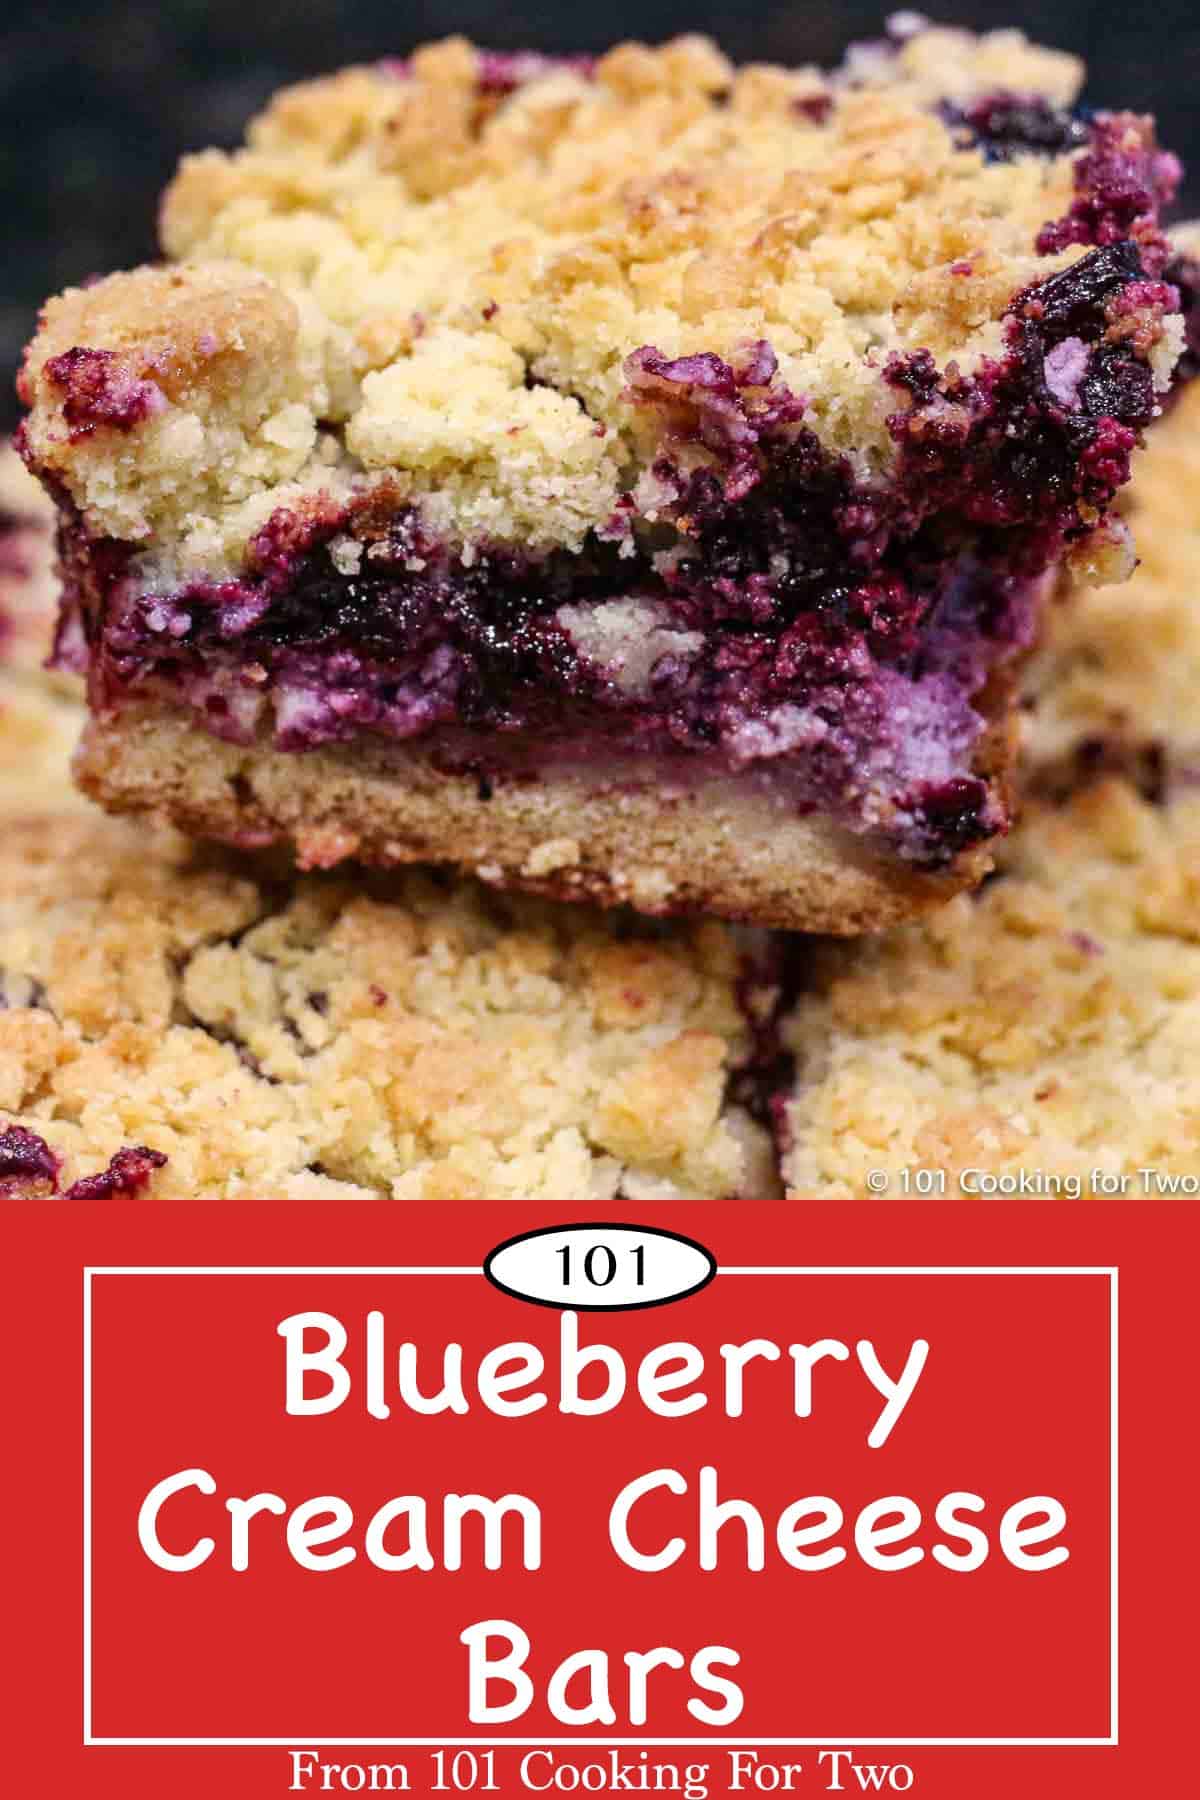 Blueberry Cream Cheese Bars - 101 Cooking For Two